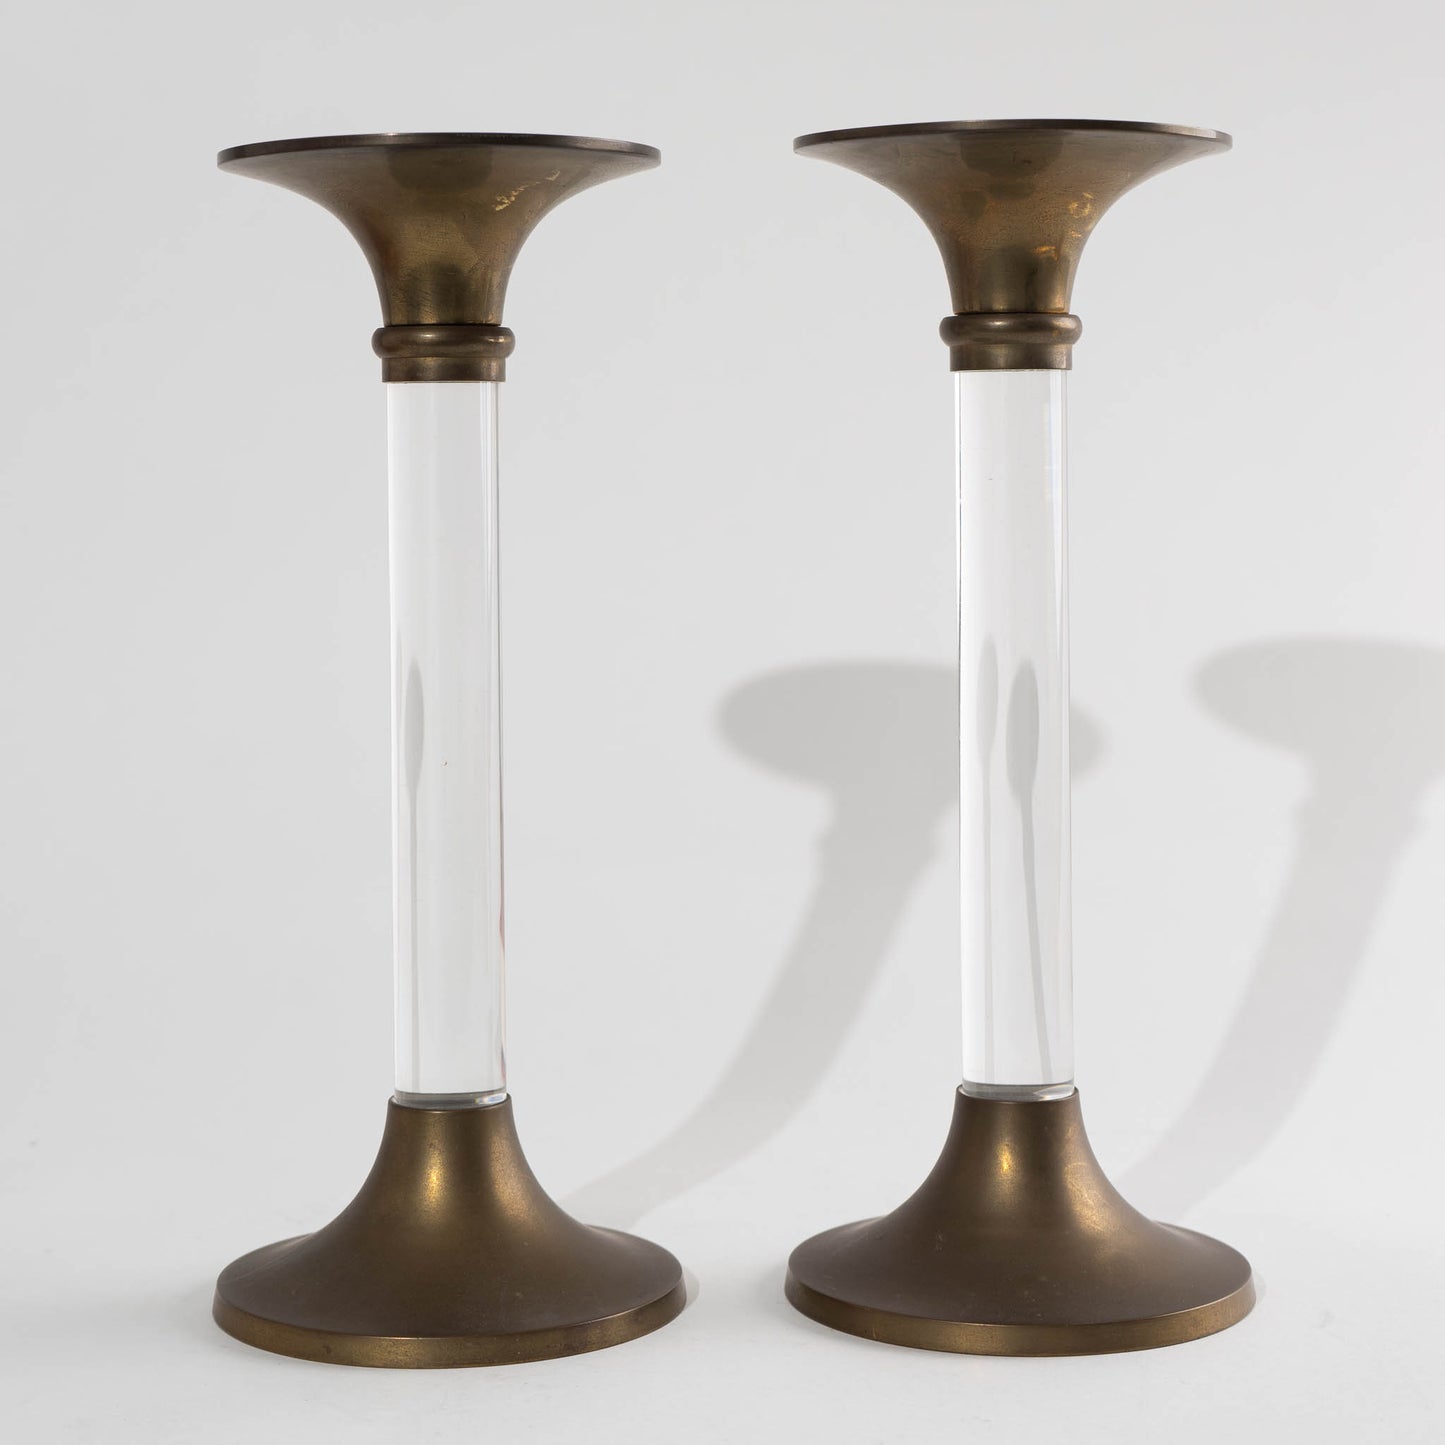 Vintage Lucite and Brass Candlestick Holders - A Pair – The Vintage Advisor